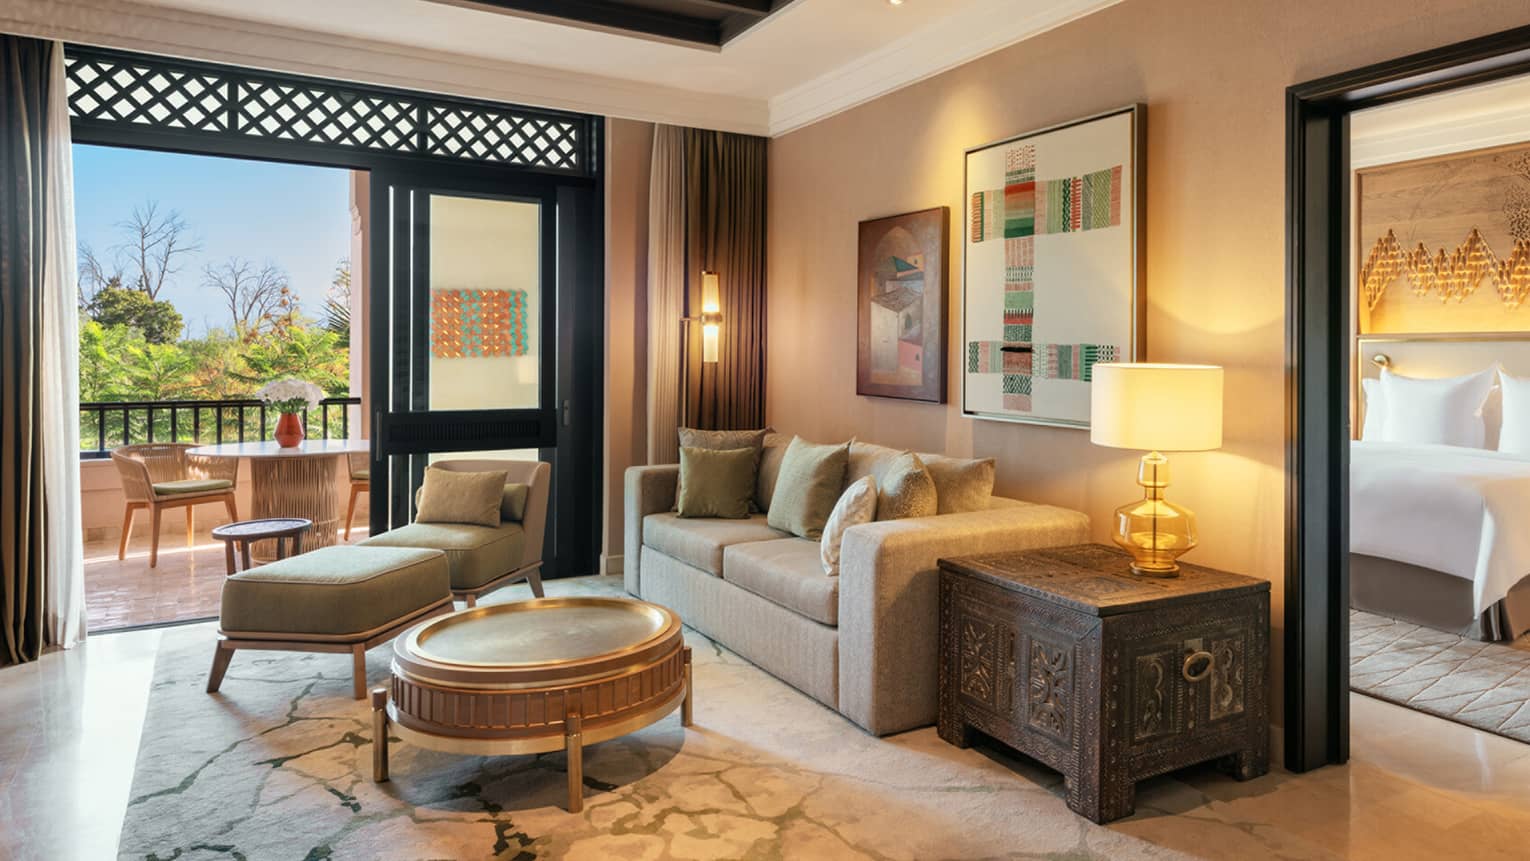 Marrakech hotel suite with living room and separate bedroom, pool view terrace